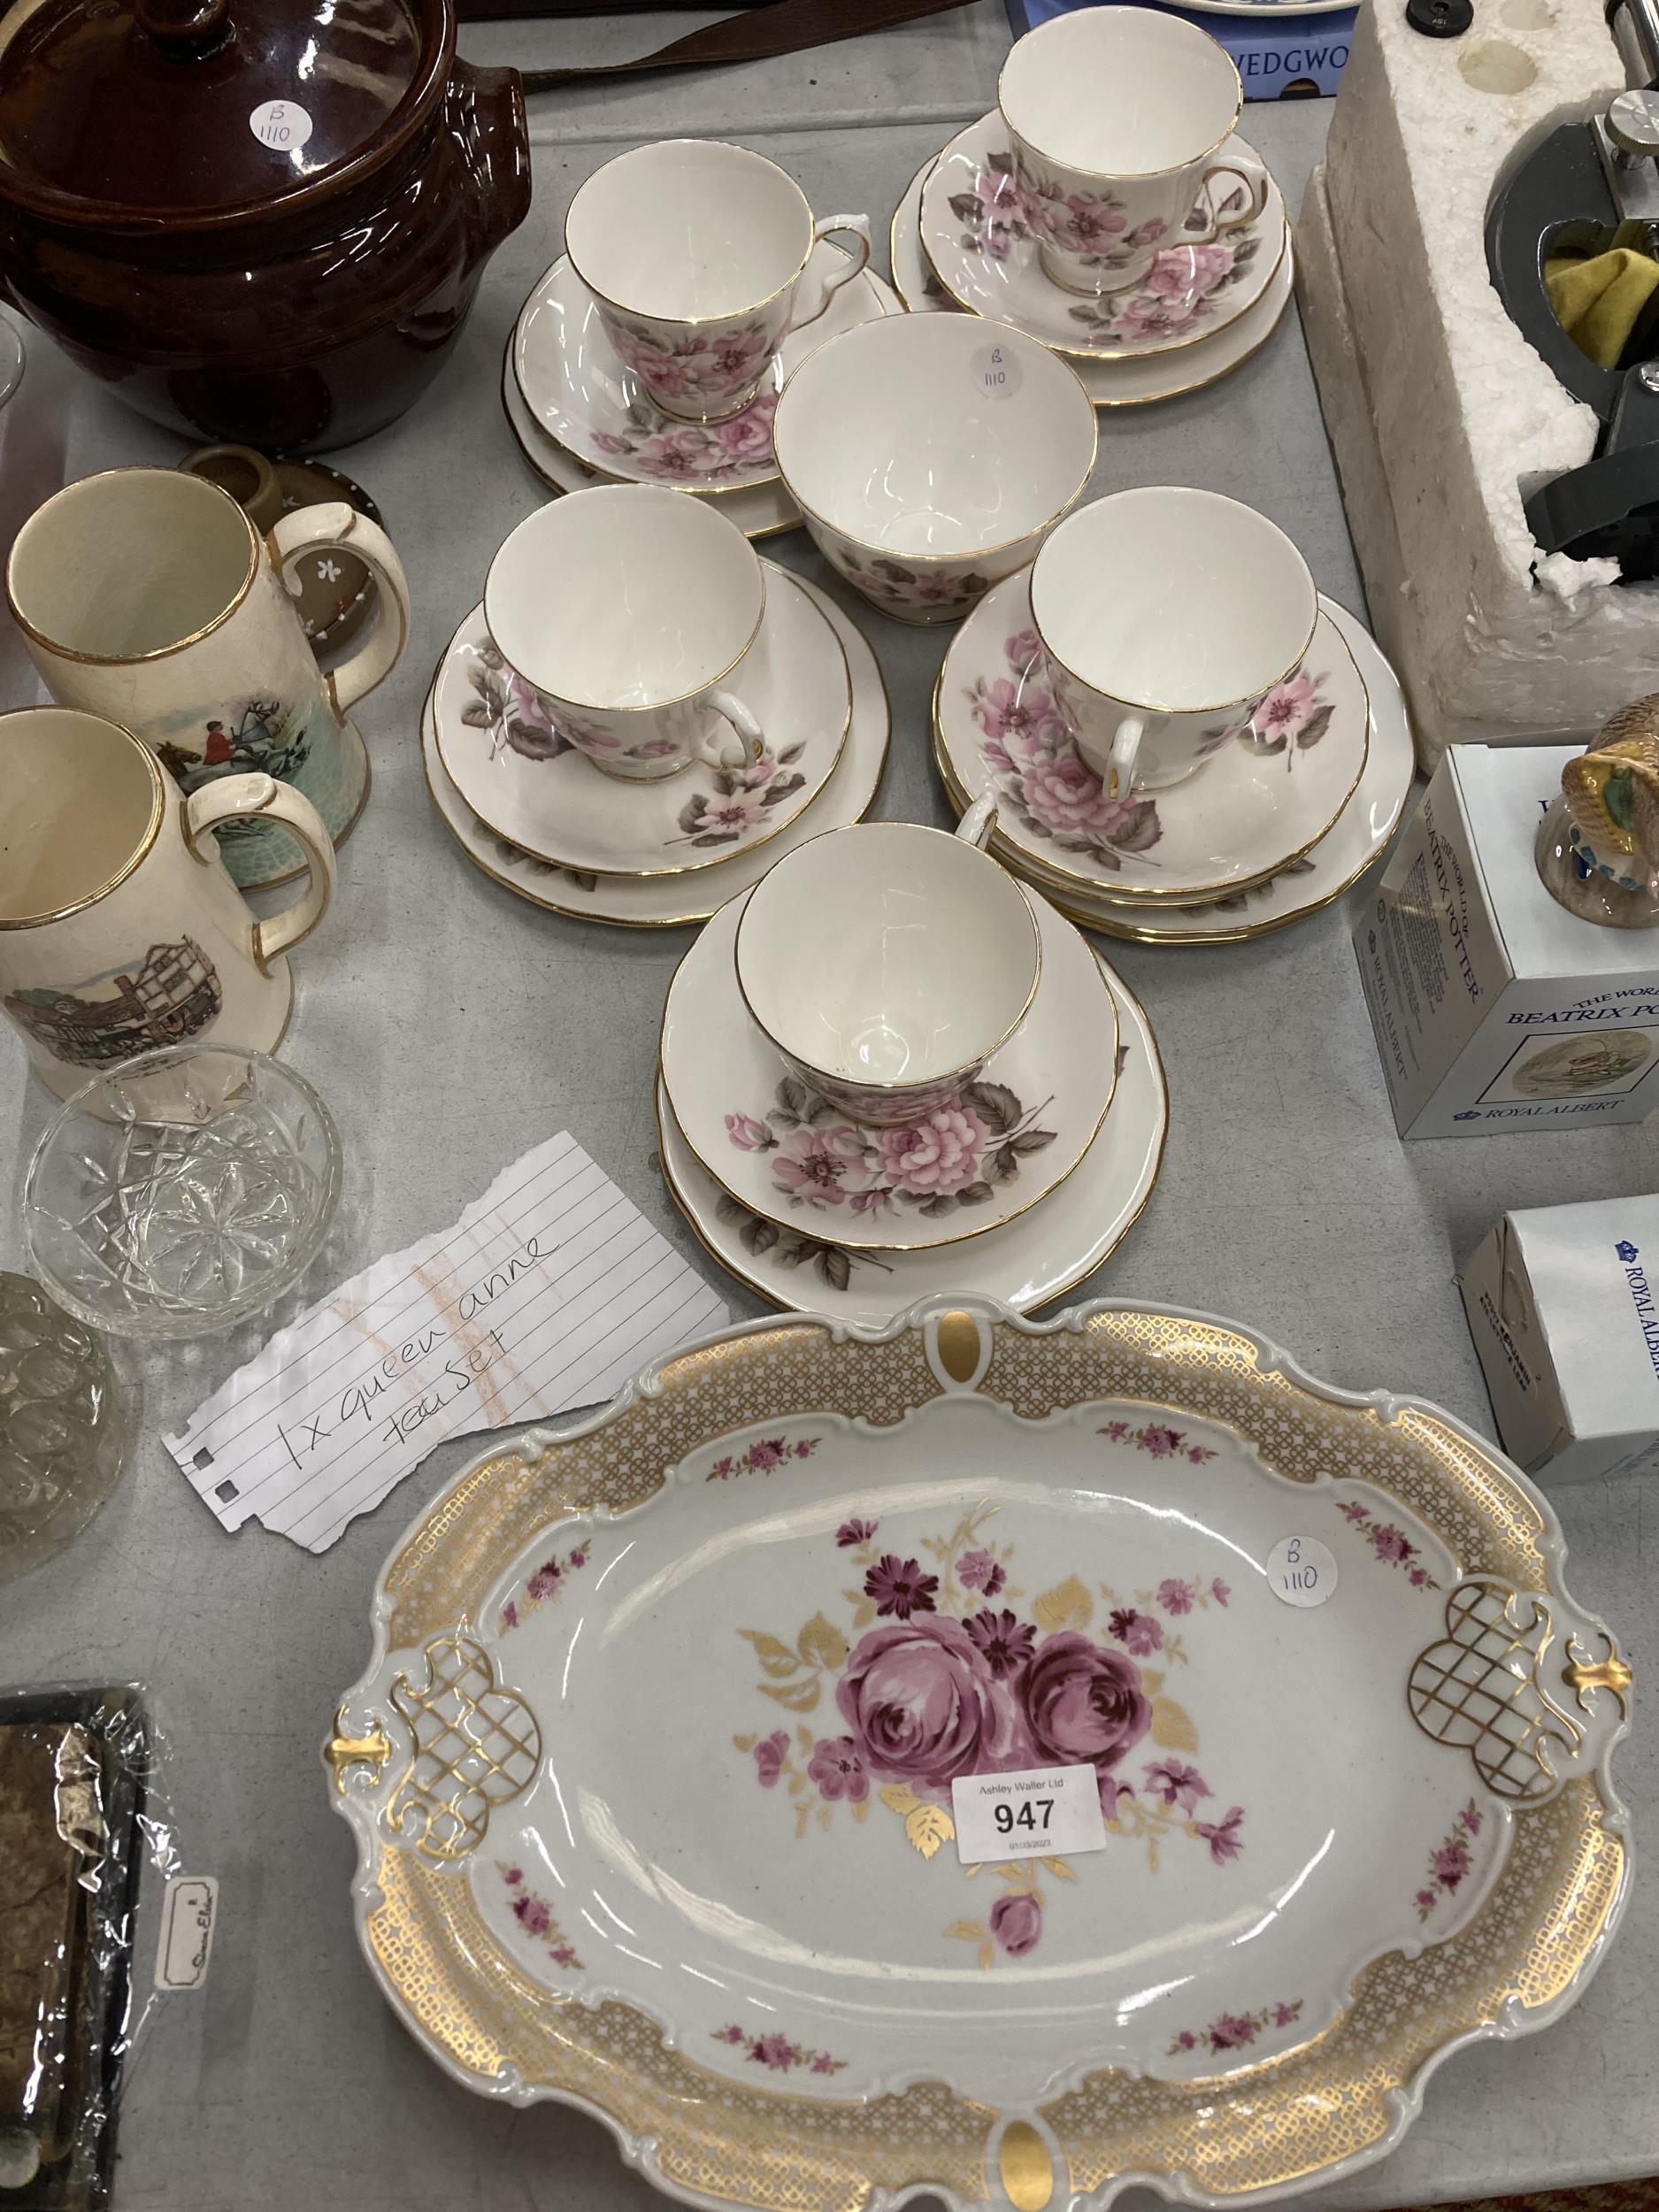 A QUEEN ANNE VINTAGE TEASET TO INCLUDE CUPS, SAUCERS, SIDE PLATES AND SUGAR BOWL PLUS A FLORA